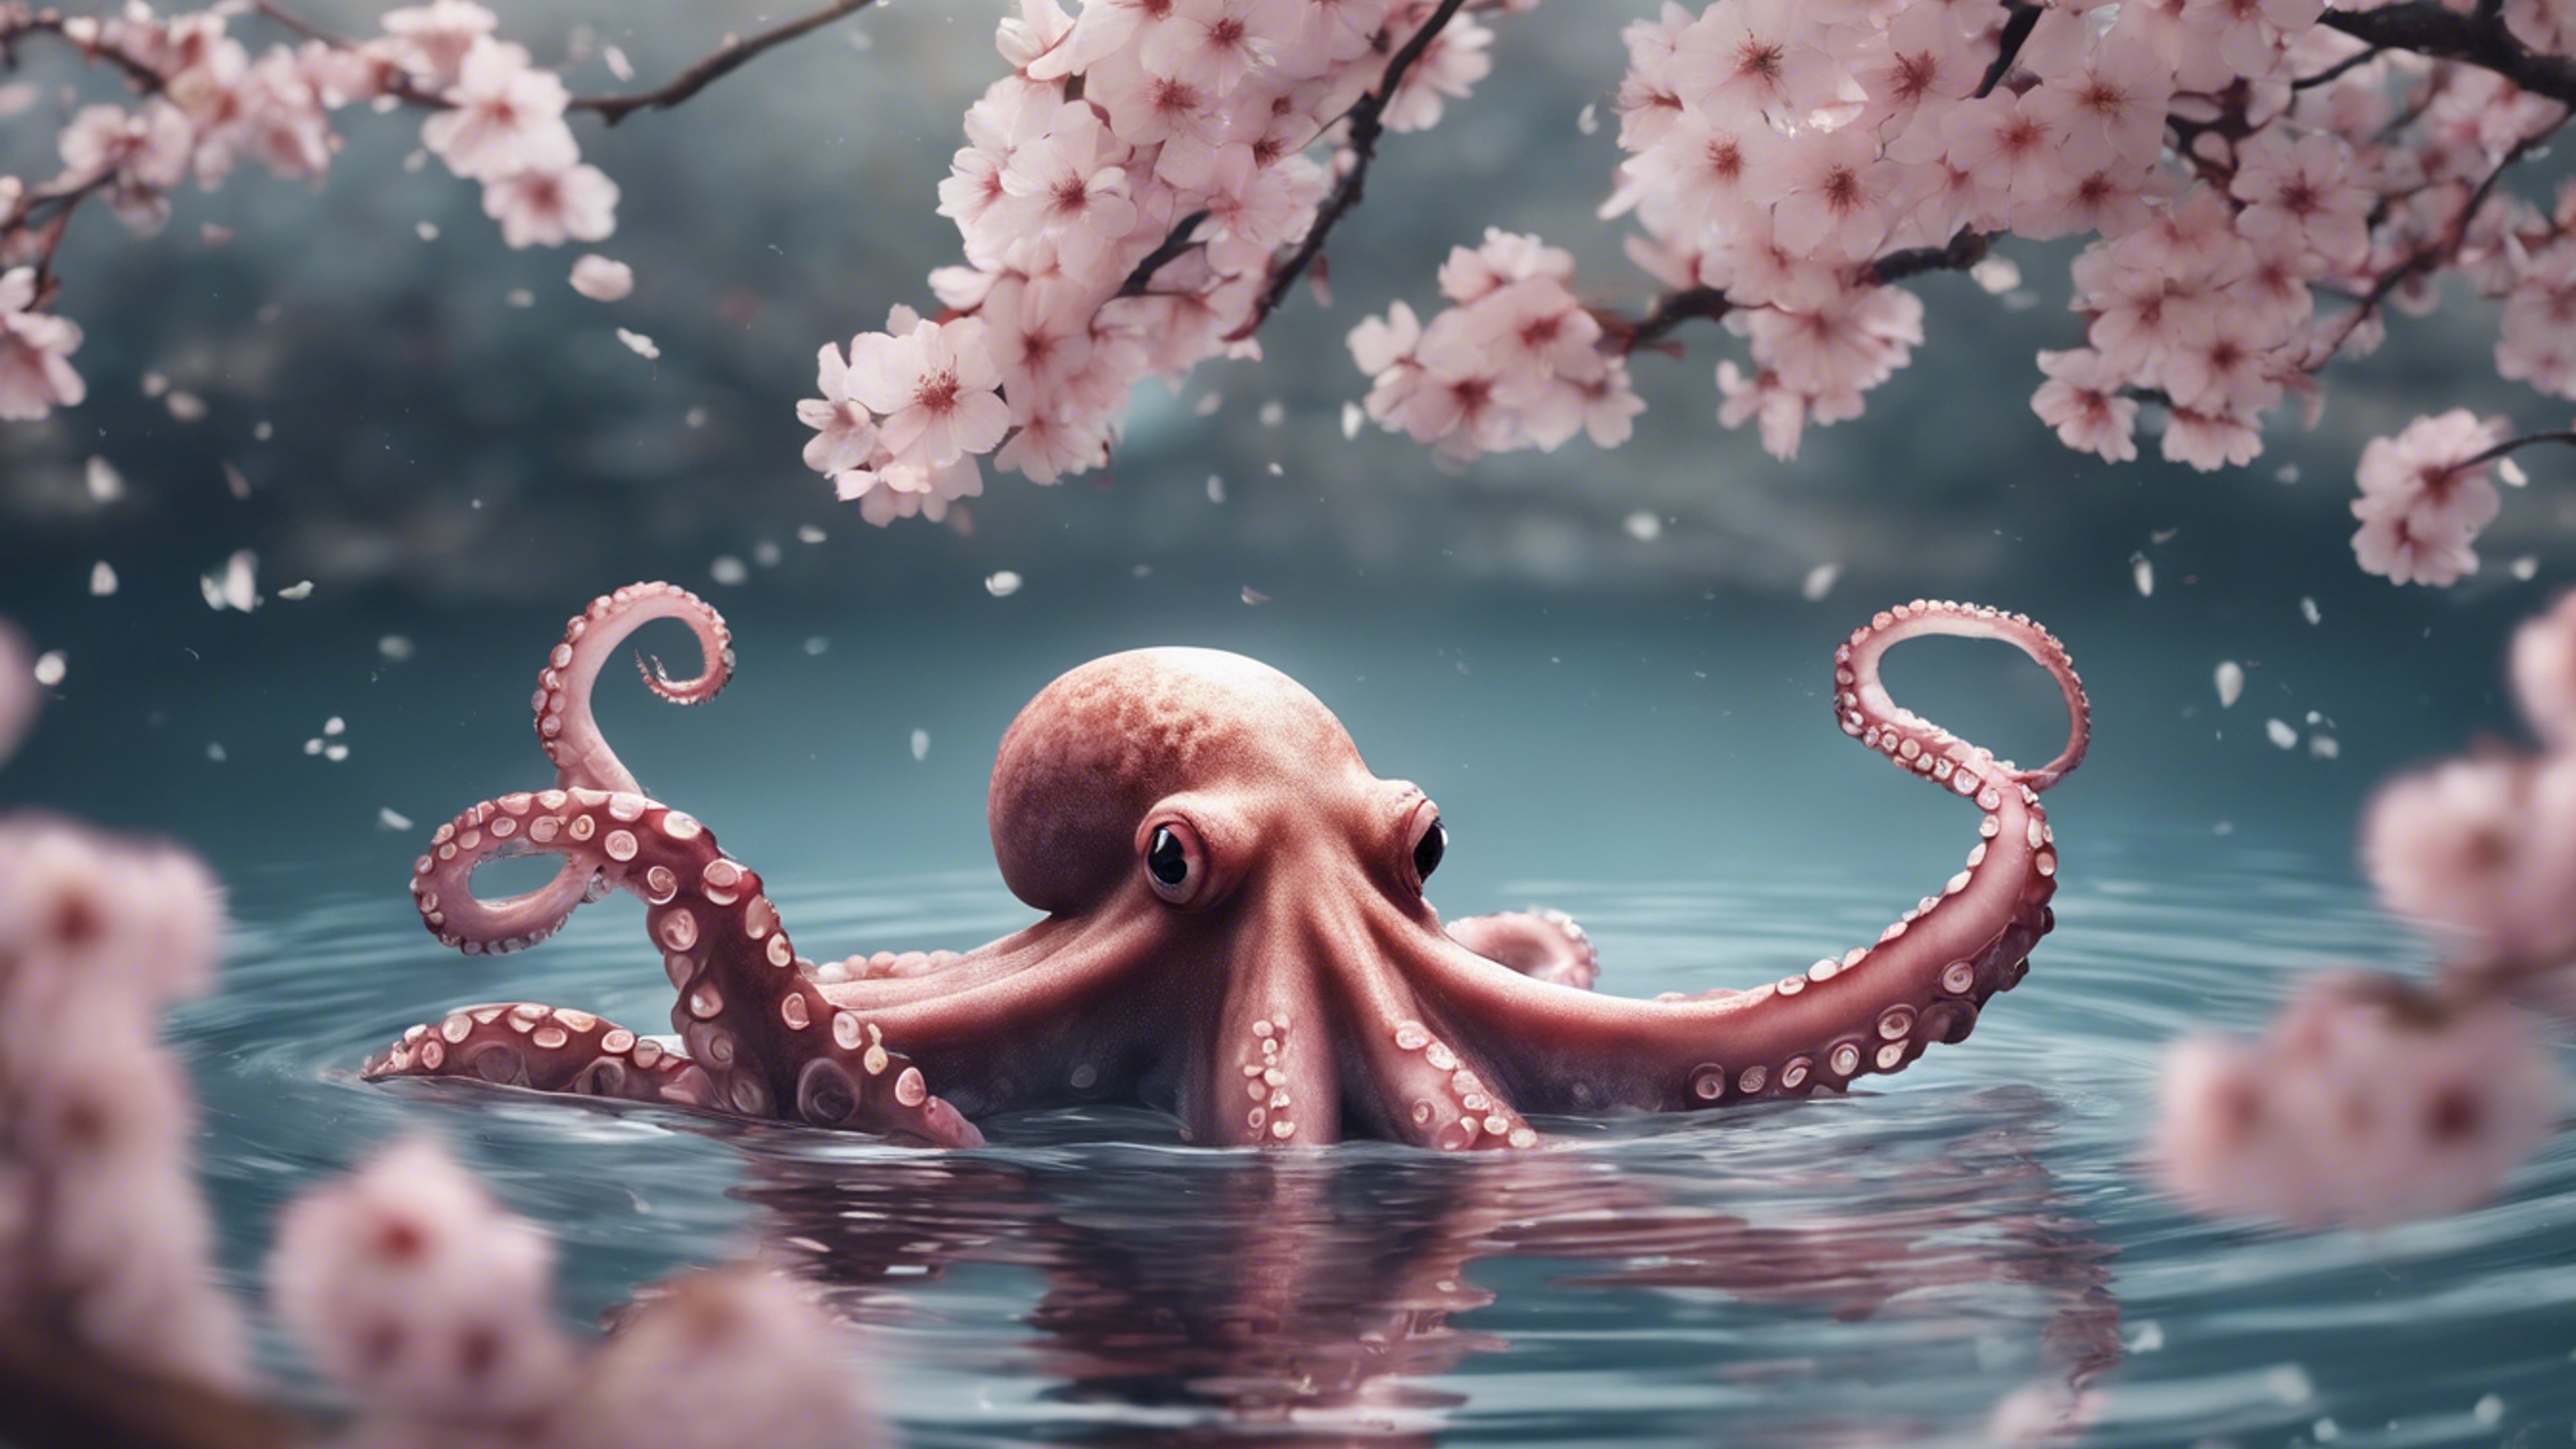 A sketch of an octopus floating peacefully in the water, with Japanese cherry blossoms gracefully falling around. Divar kağızı[a4f14d80ca6f4b538d98]